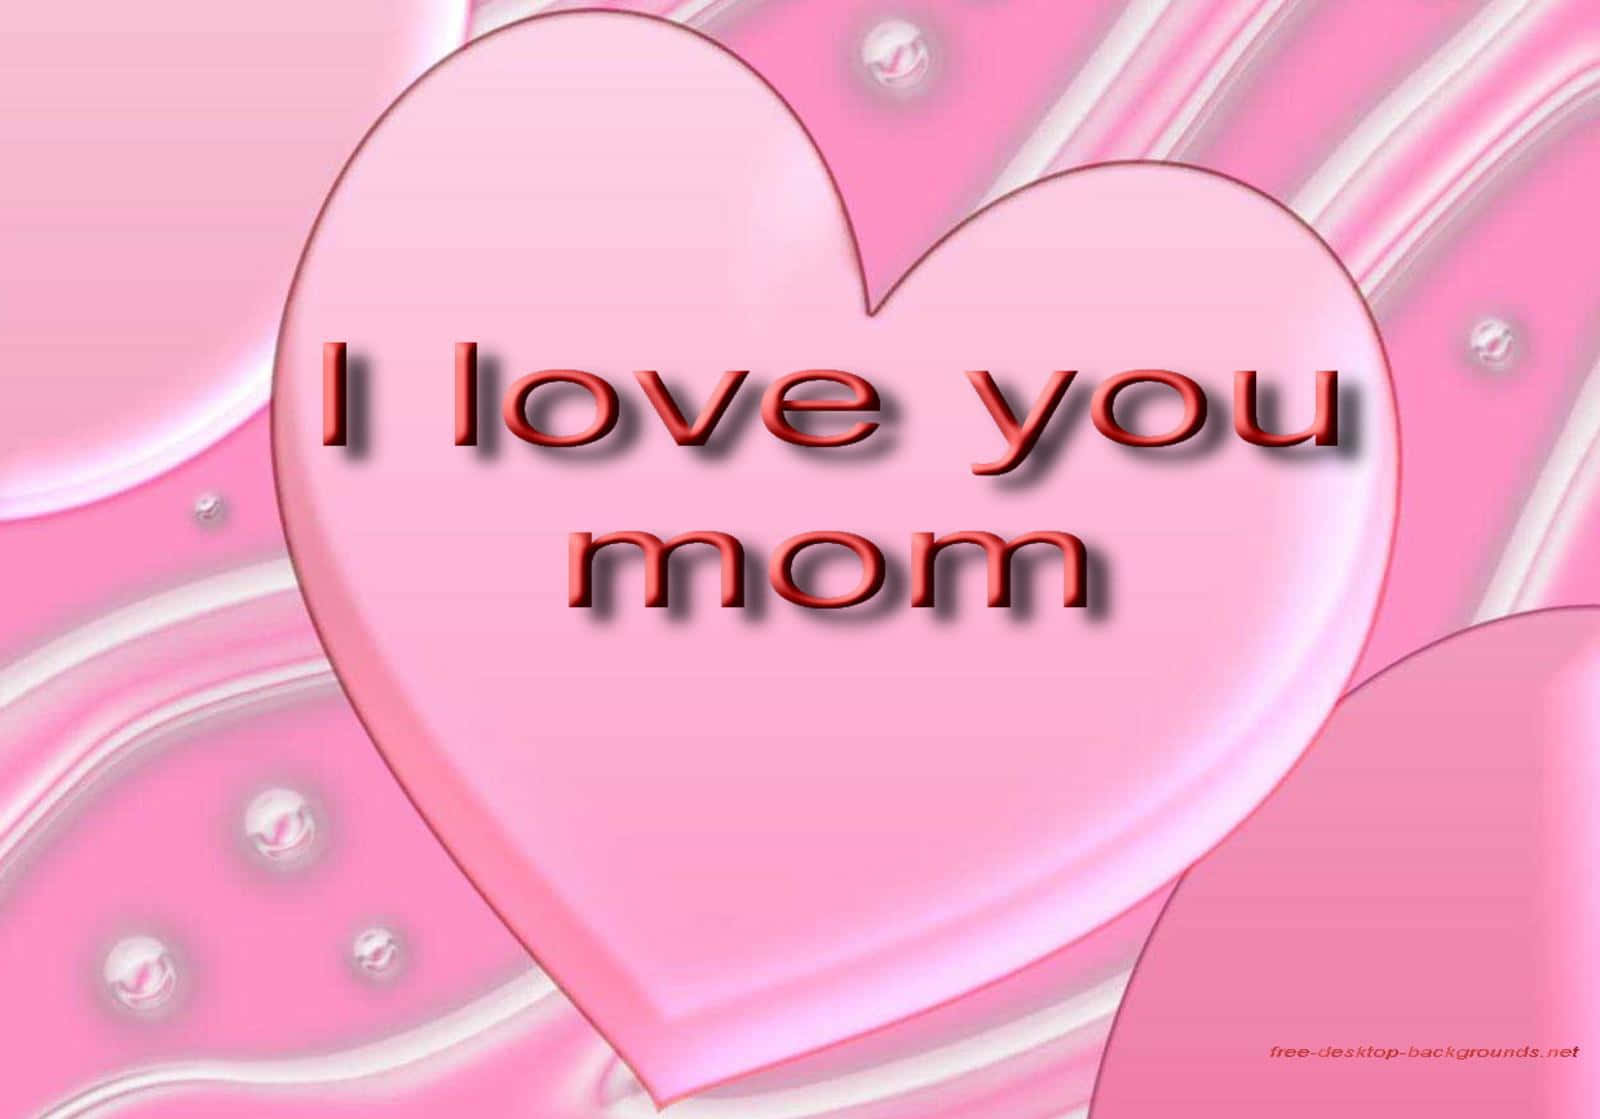 You Are Best Mom Quotes For Others Day Wallpaper Background Wallpaper Image  For Free Download - Pngtree